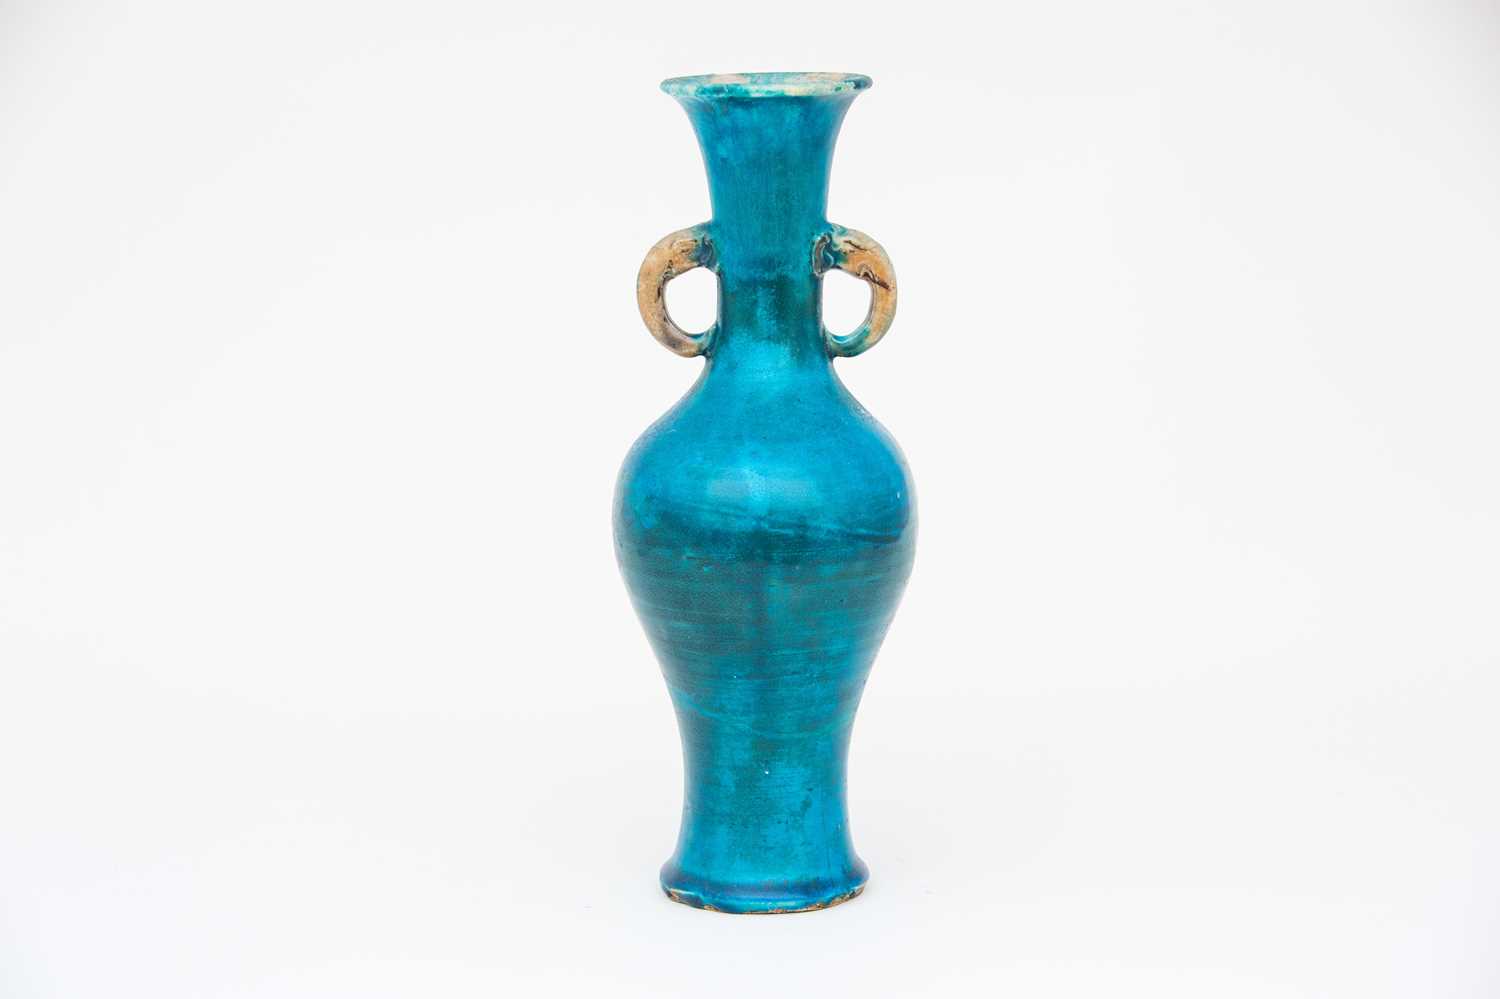 A Chinese porcelain turquoise glaze vase, 中国，青蓝釉双耳瓷瓶一件，可以明代 possibly Ming dynasty, with buff